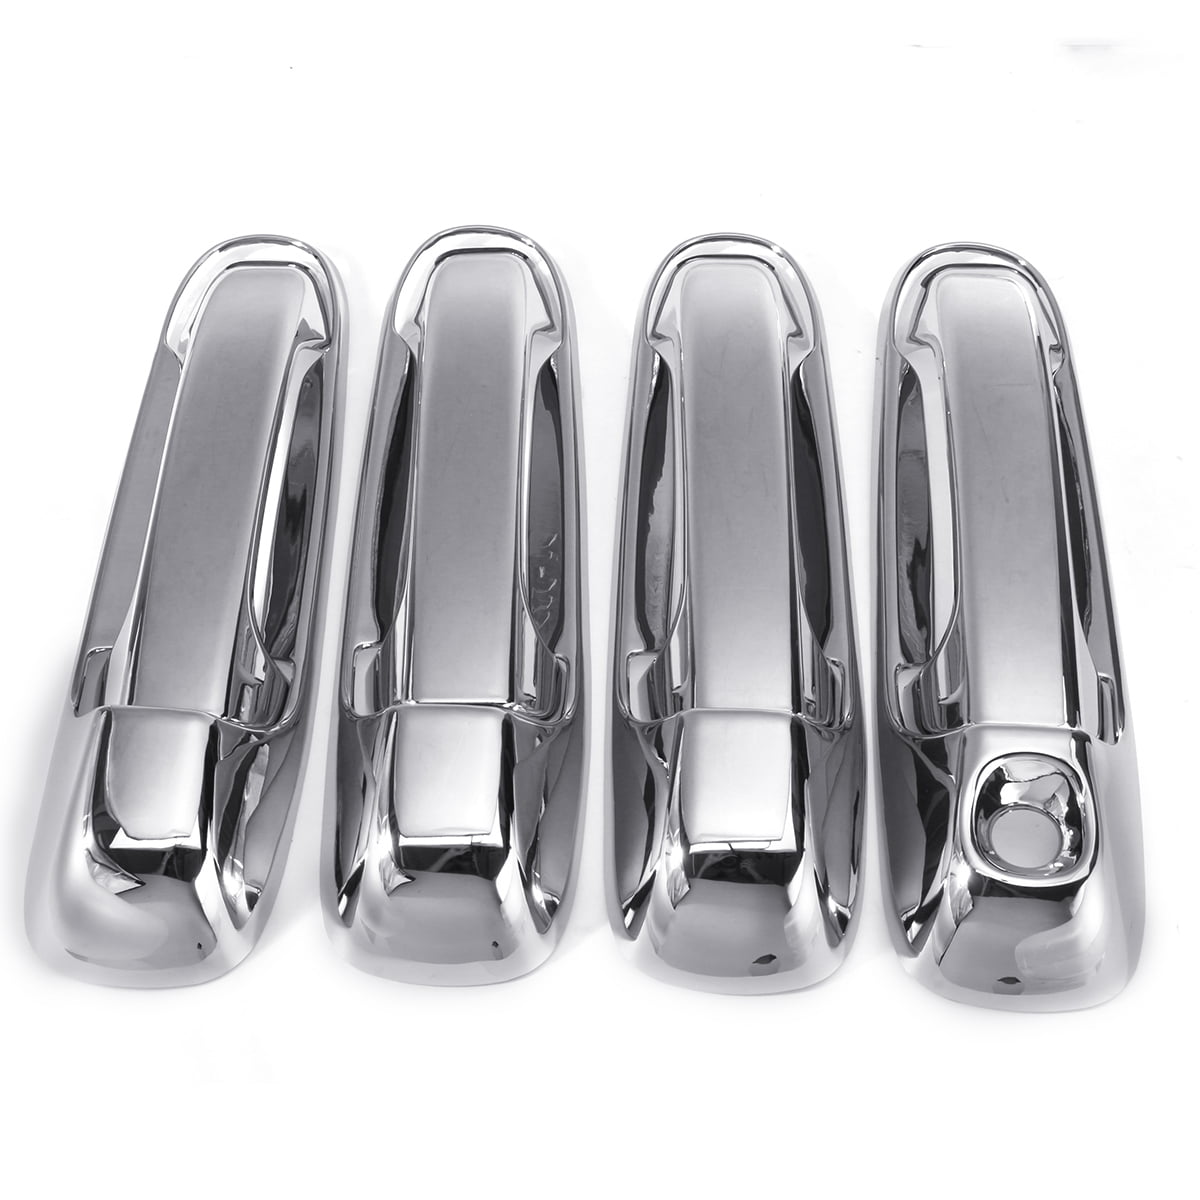 For 2002-2008 Dodge Ram 1500 2500 3500 Chrome Tailgate Door Handle Cover Overlay